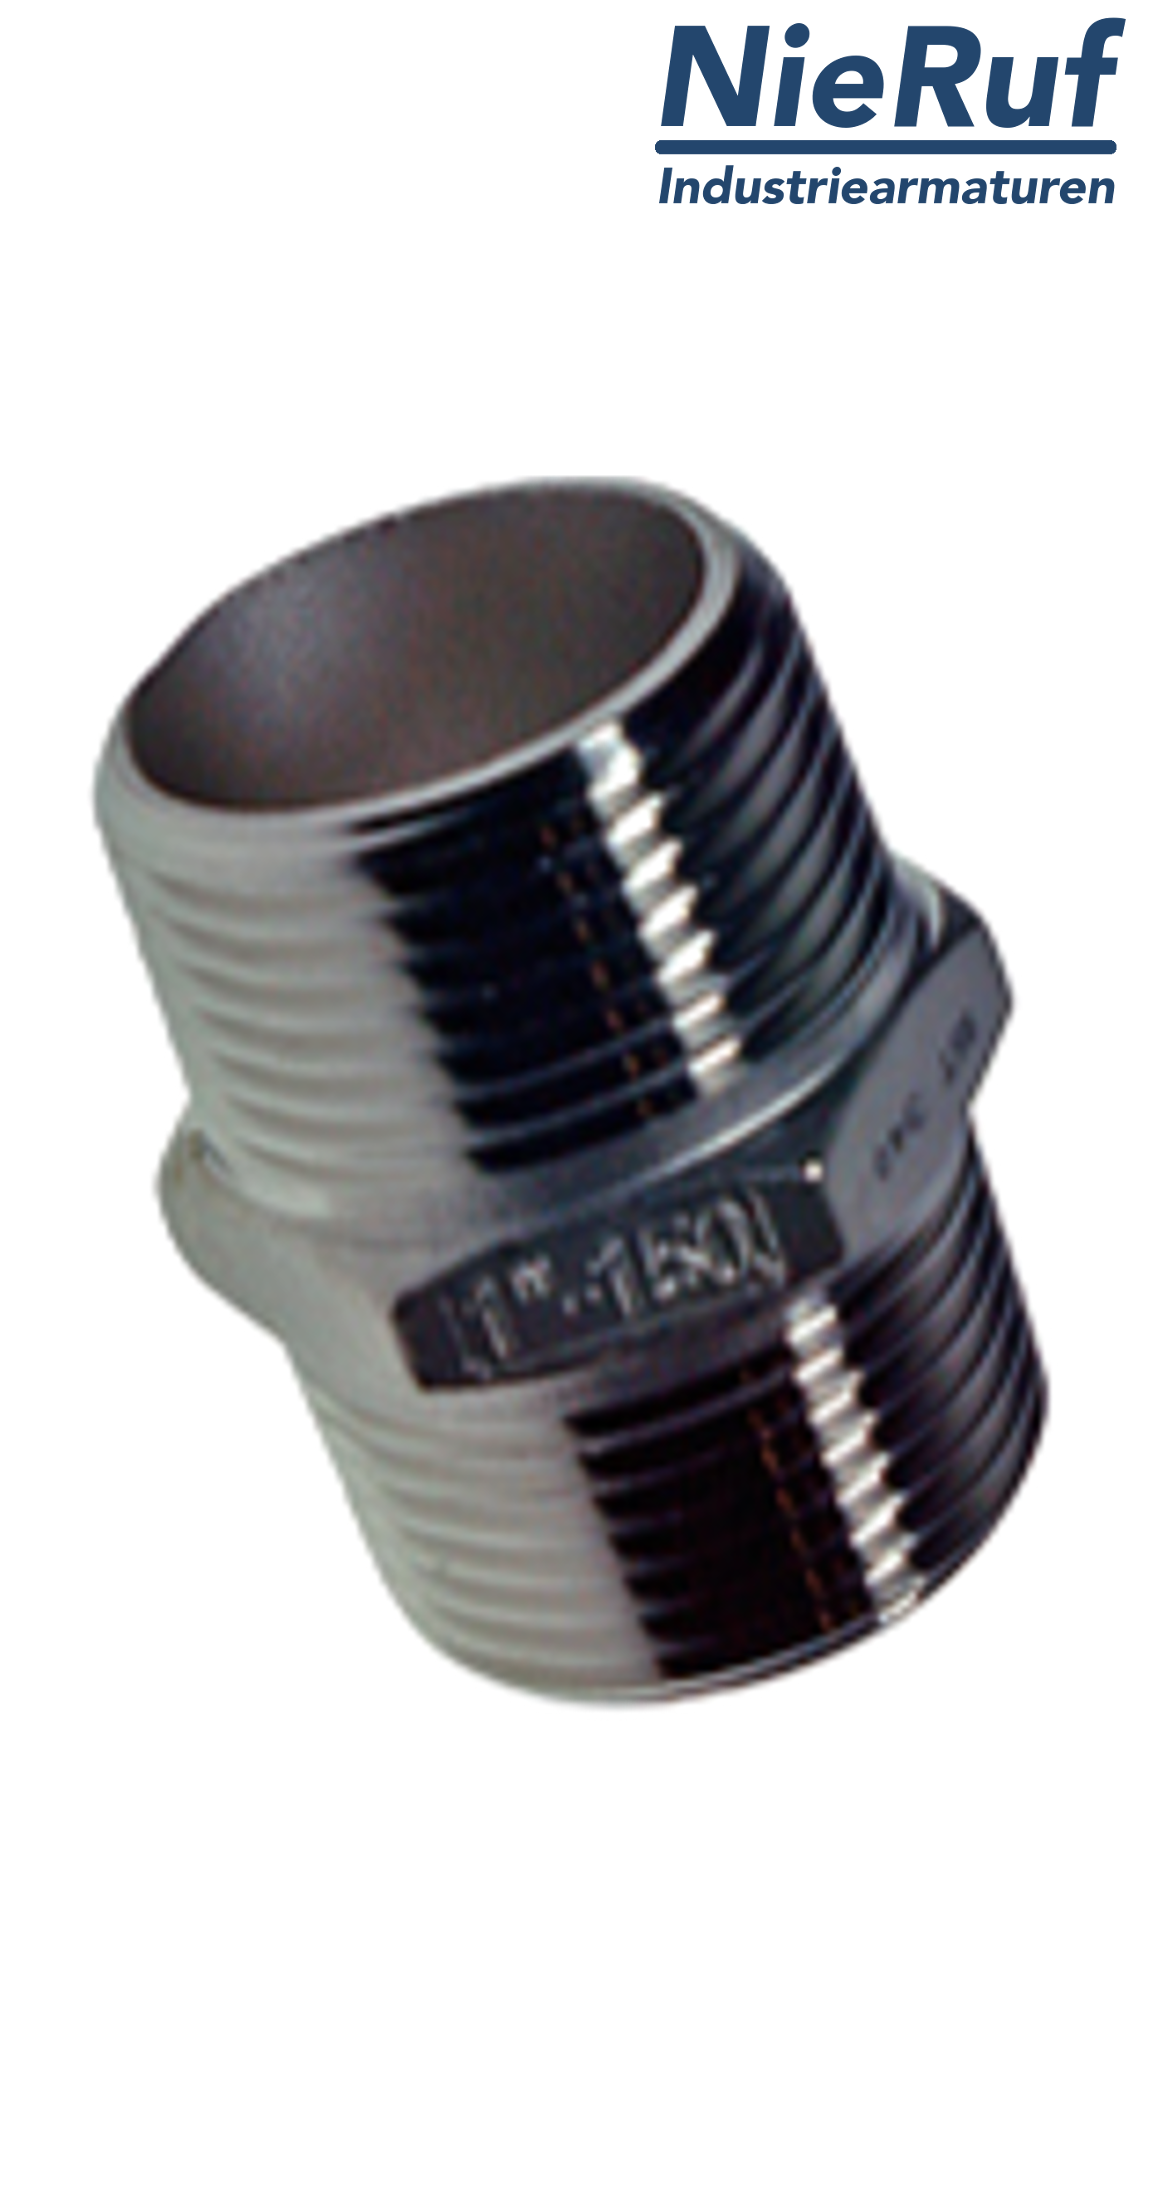 double nipple 1 1/2" inch NPT male stainless steel 316